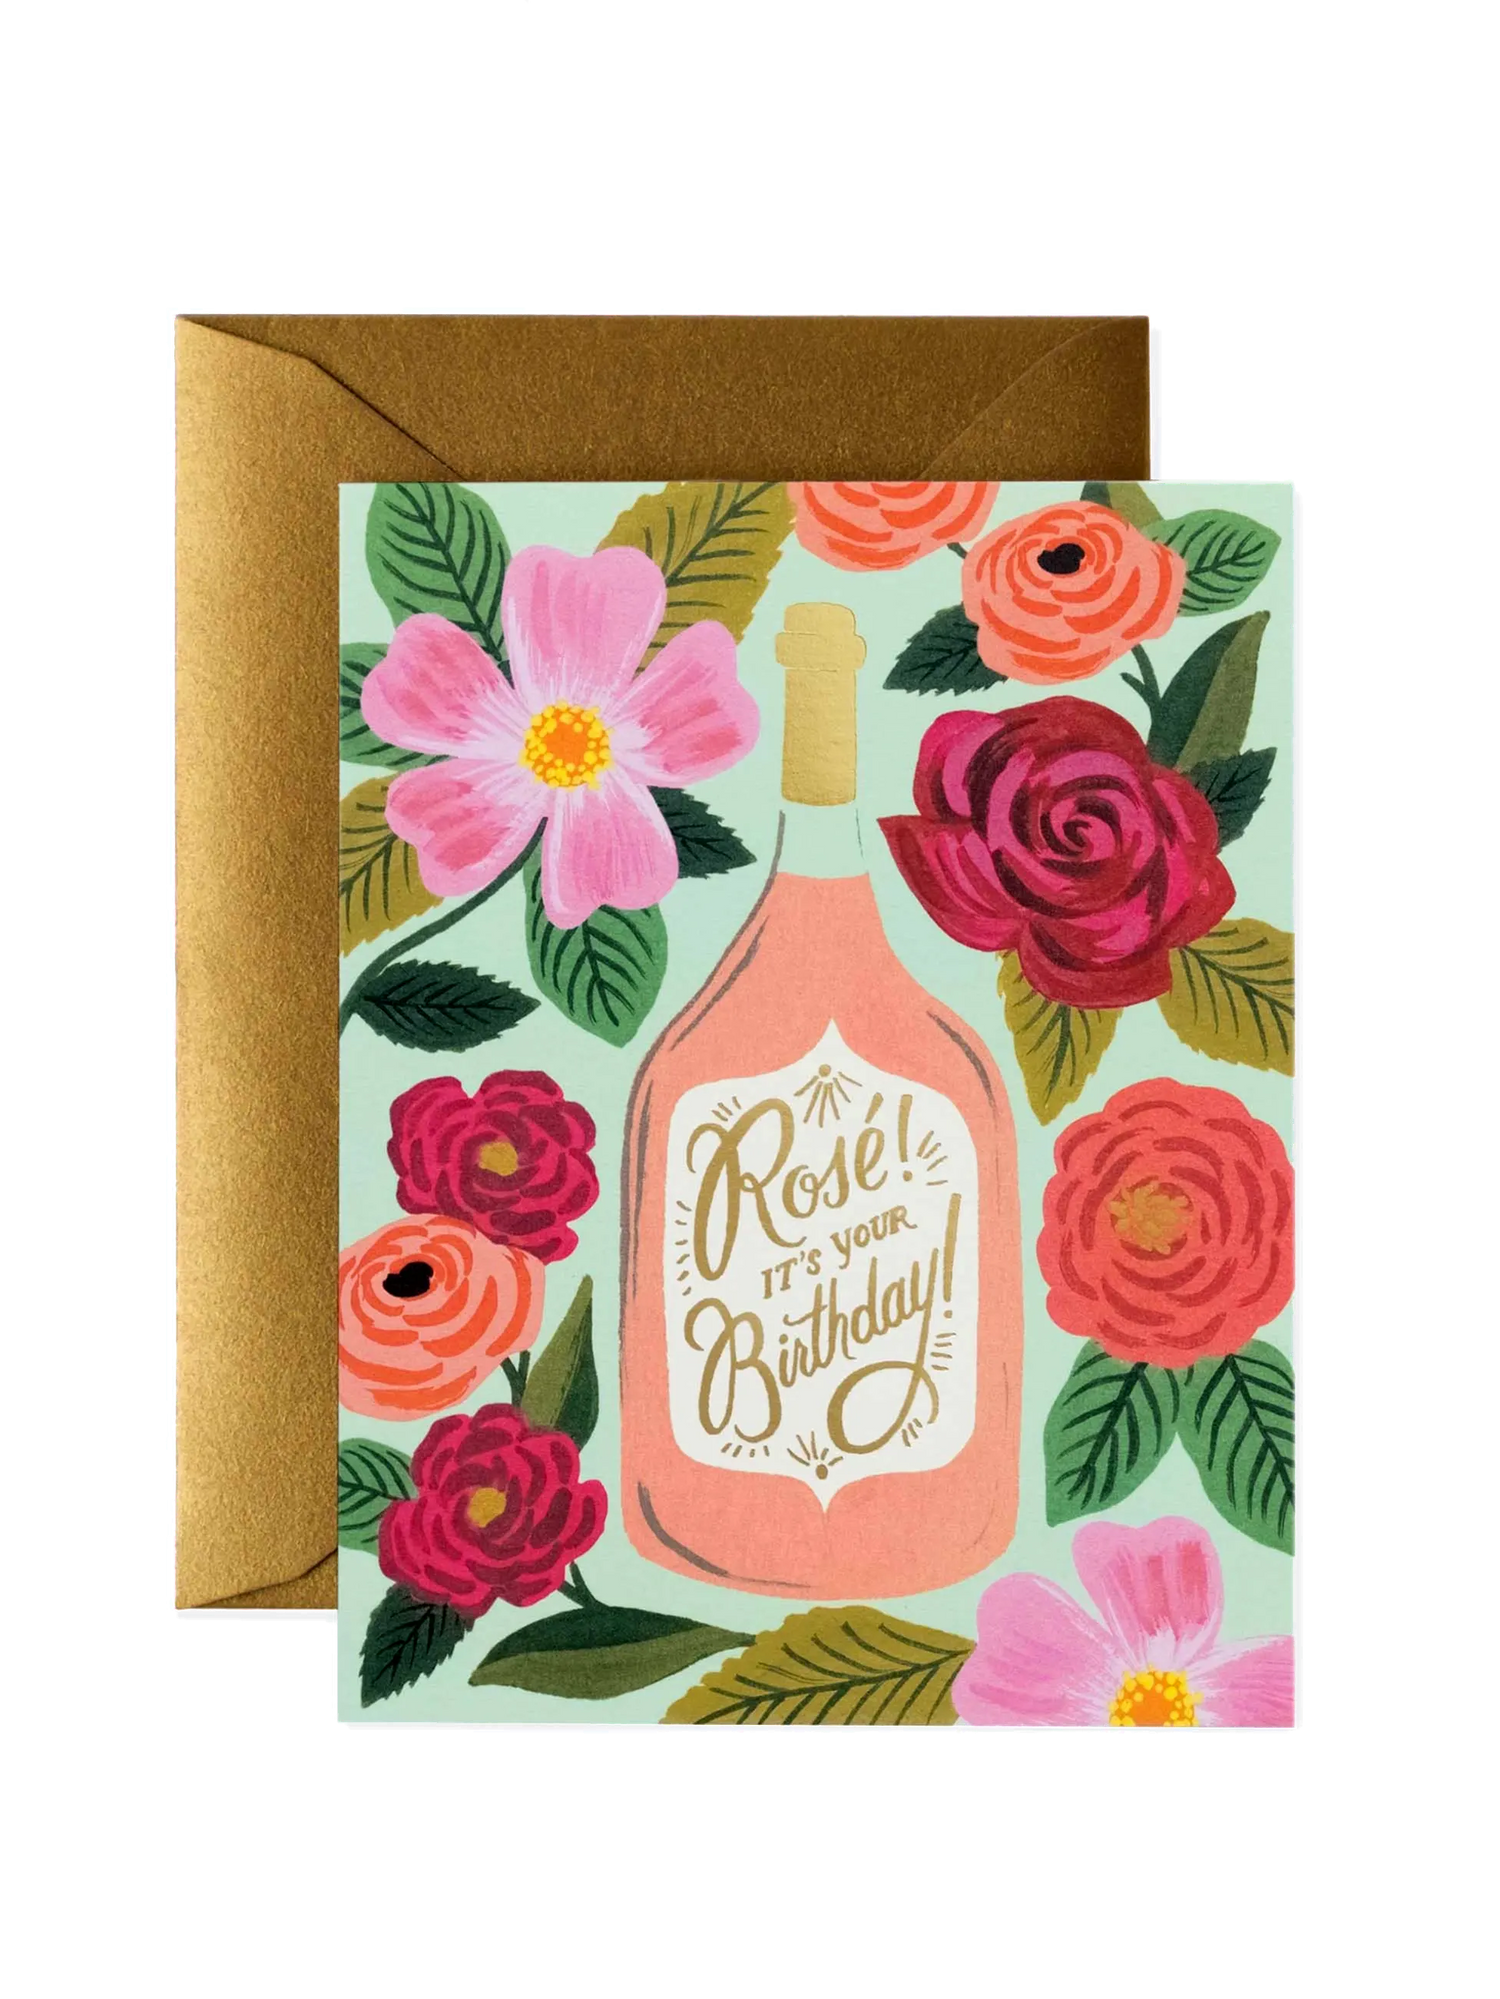 Rosé it's your birthday - greeting card